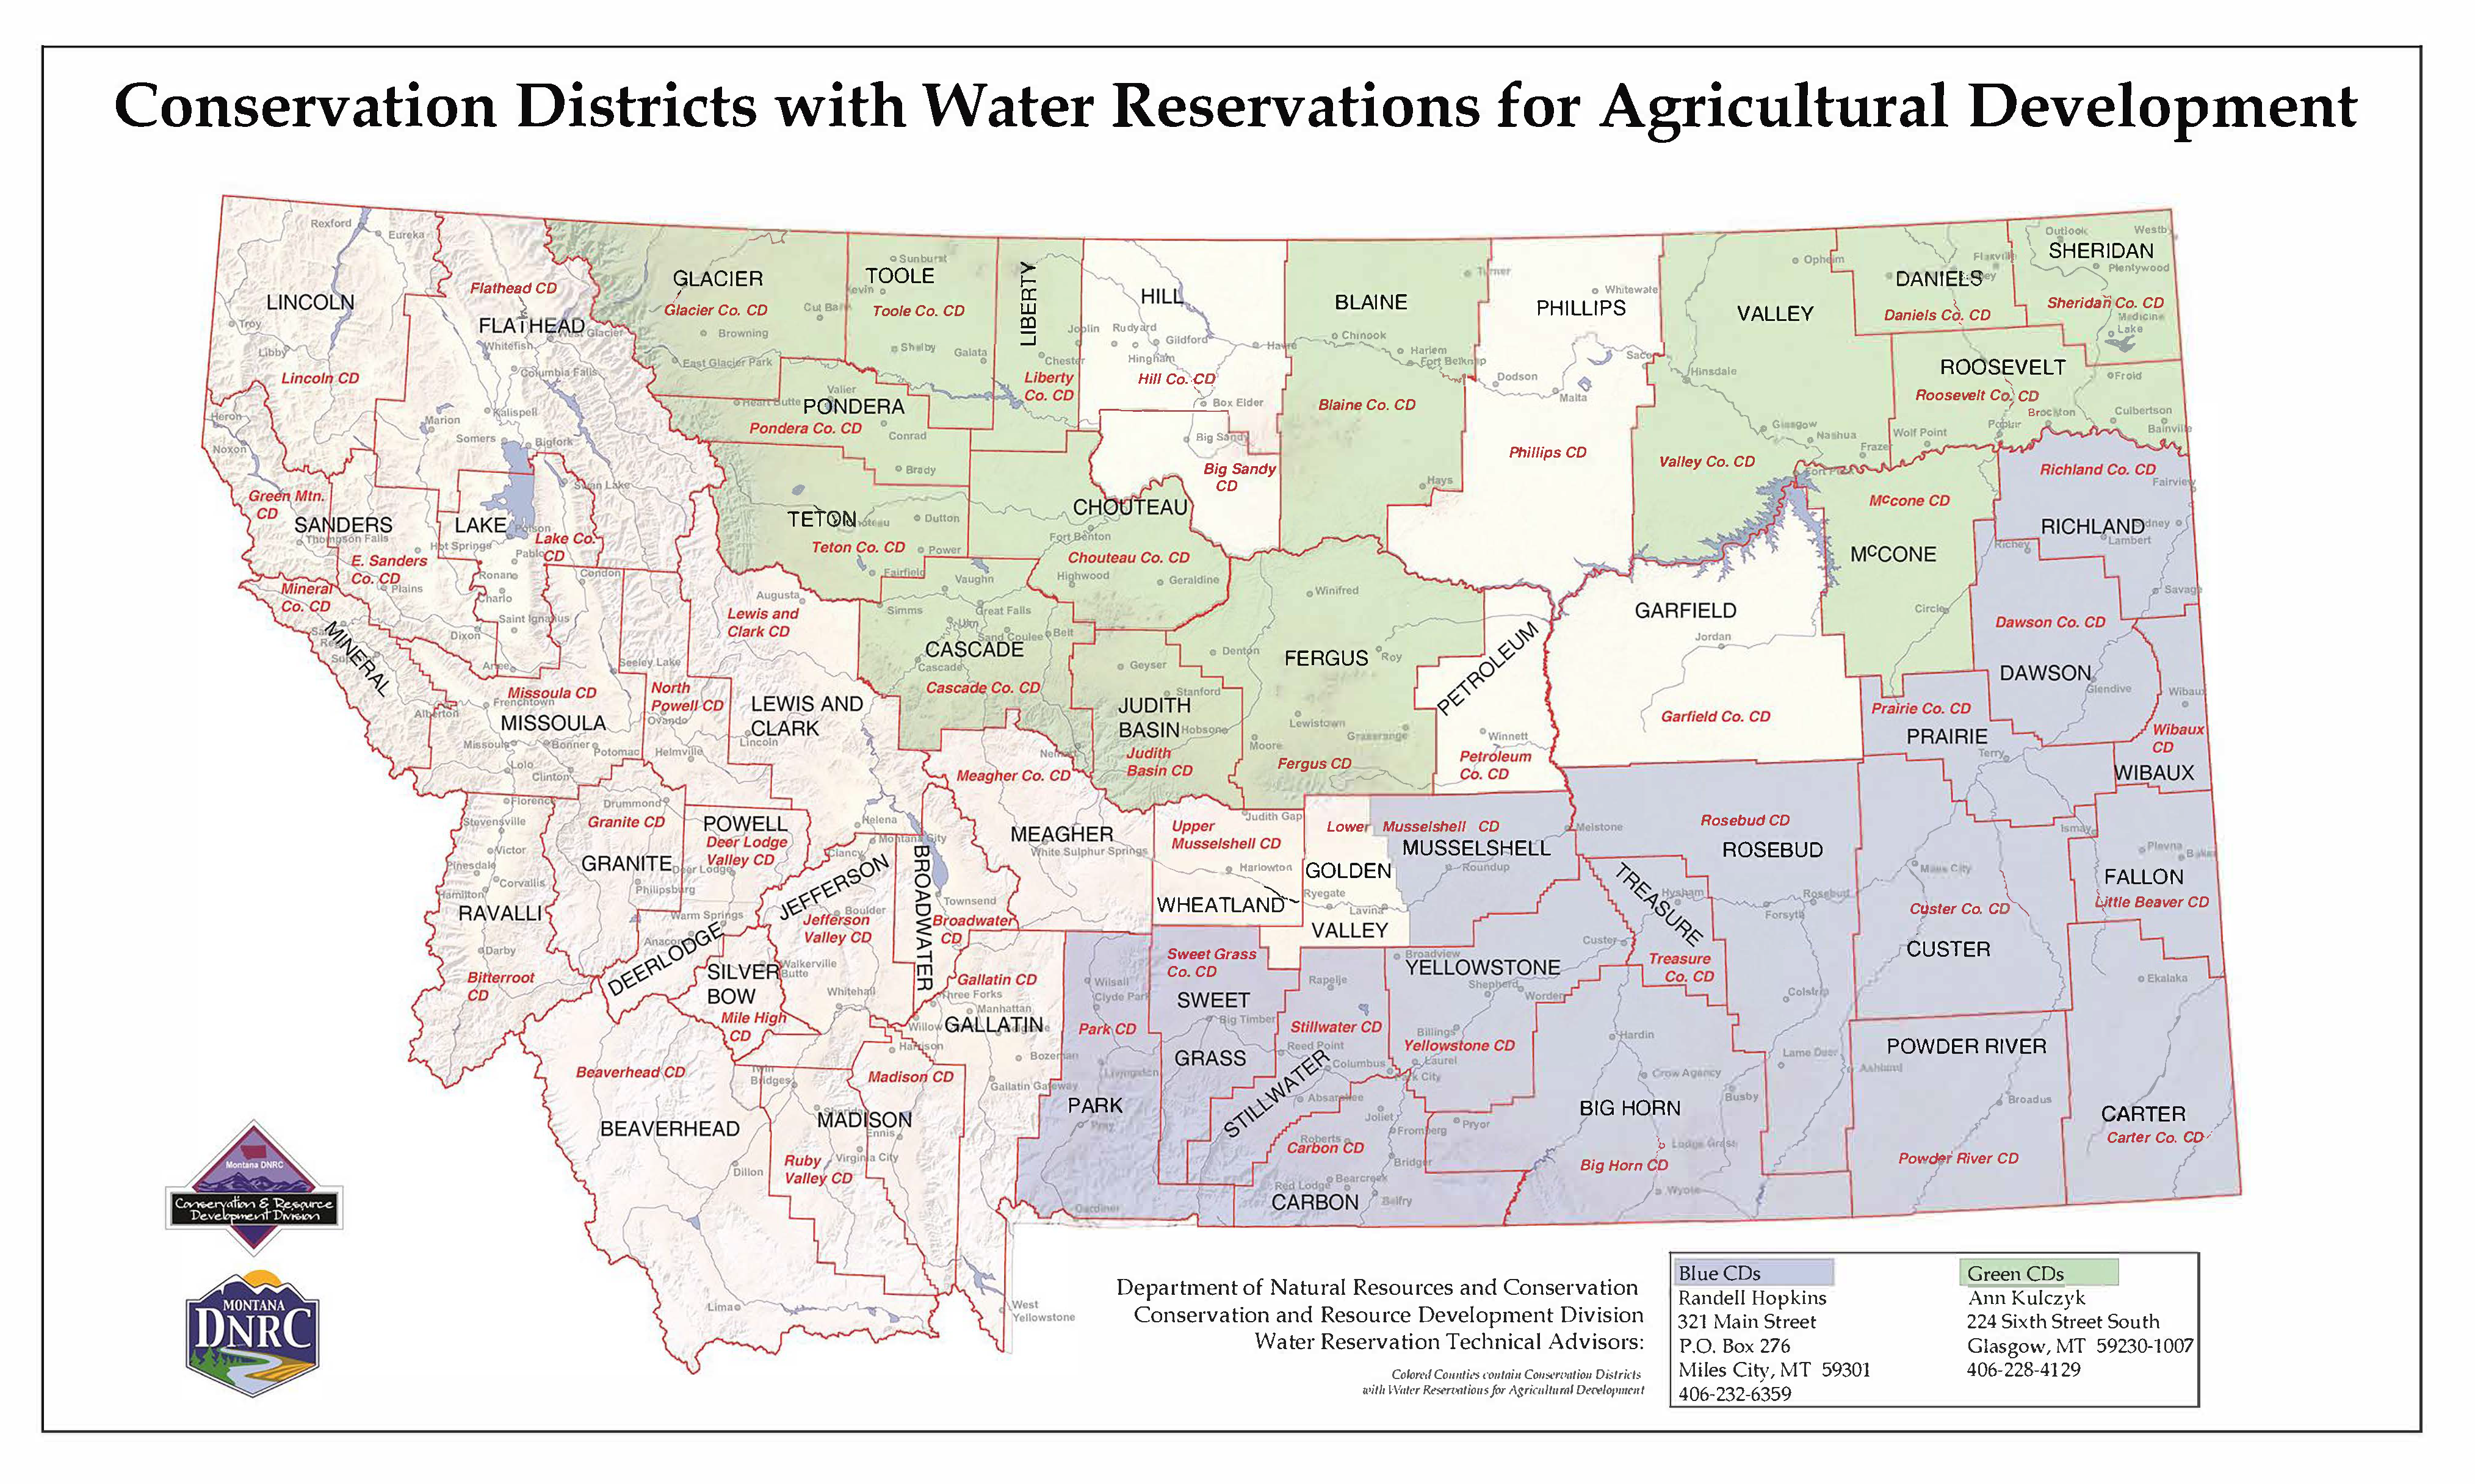 water.reservation.districts.Map.jpg